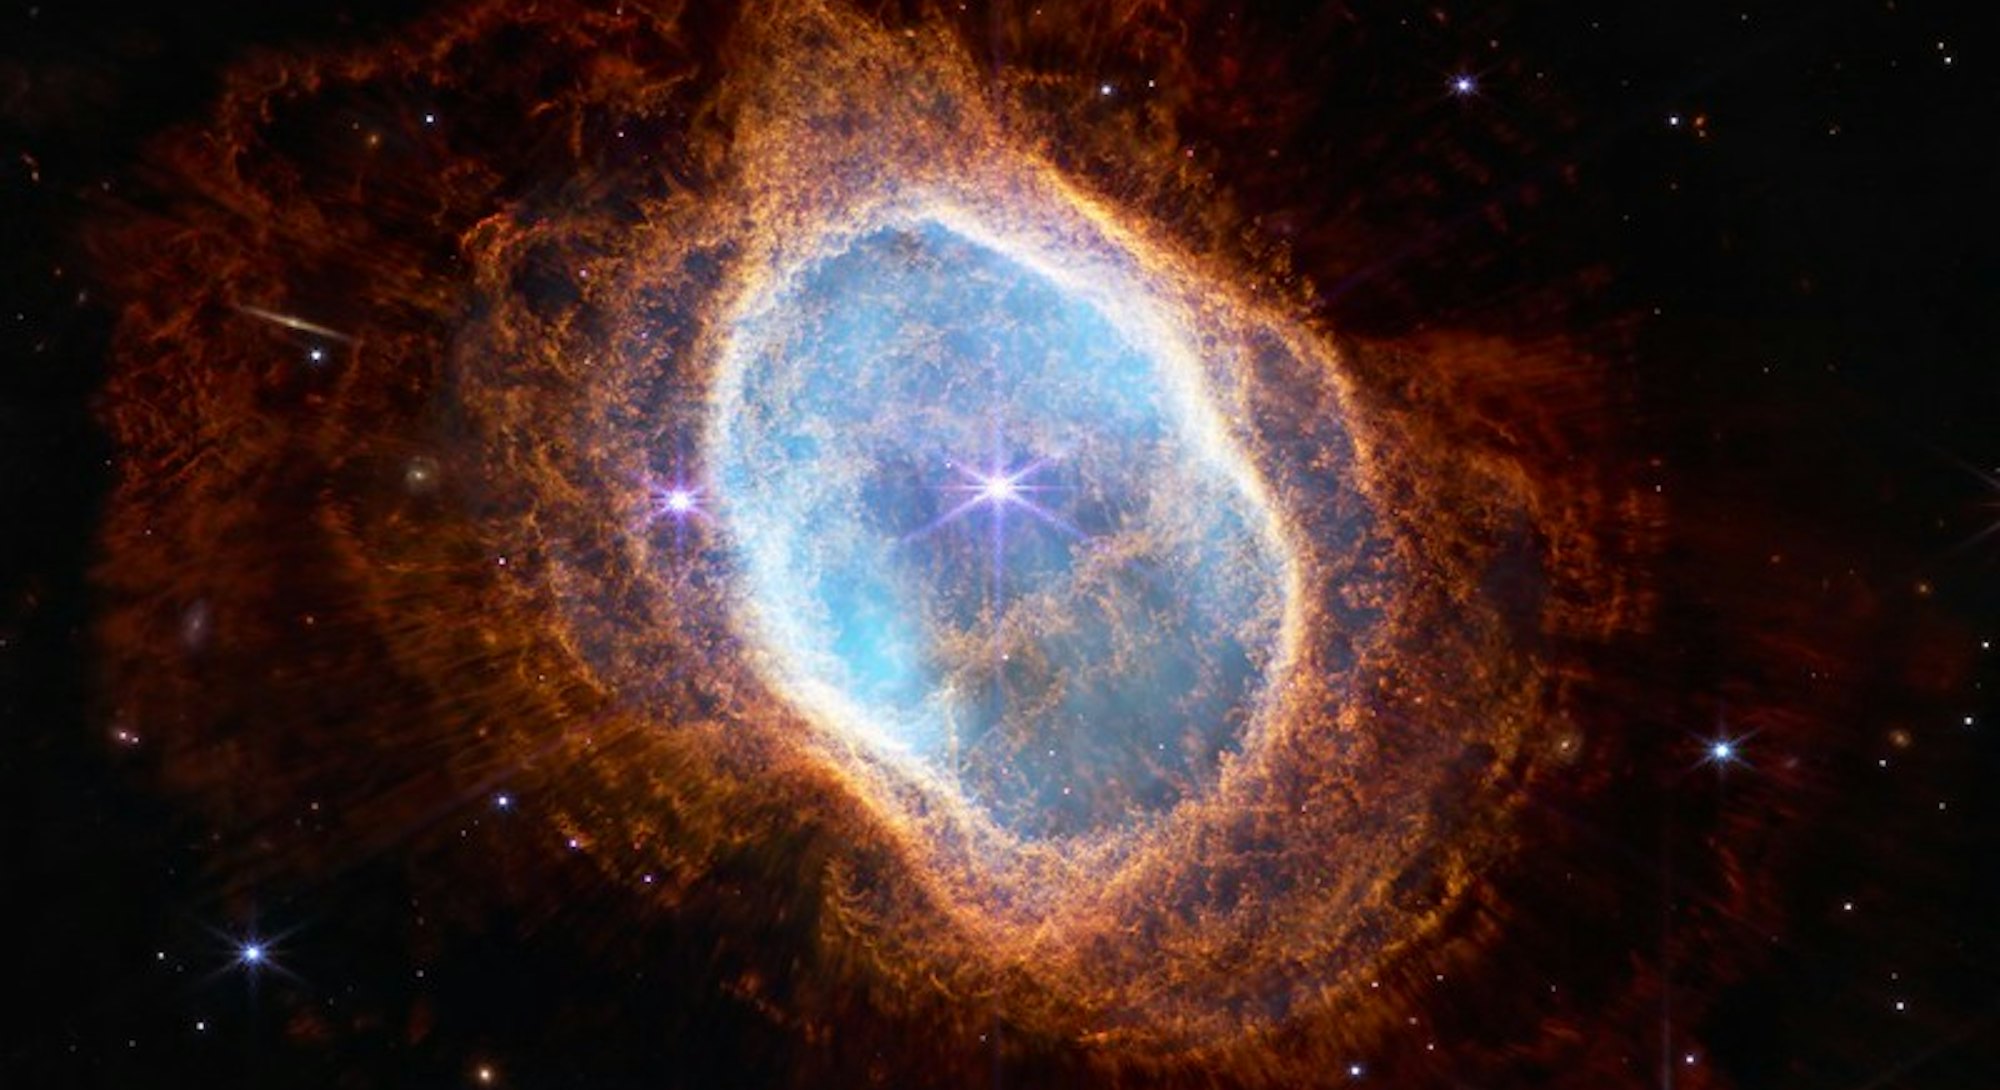 a dying star, nasa webb images for kids